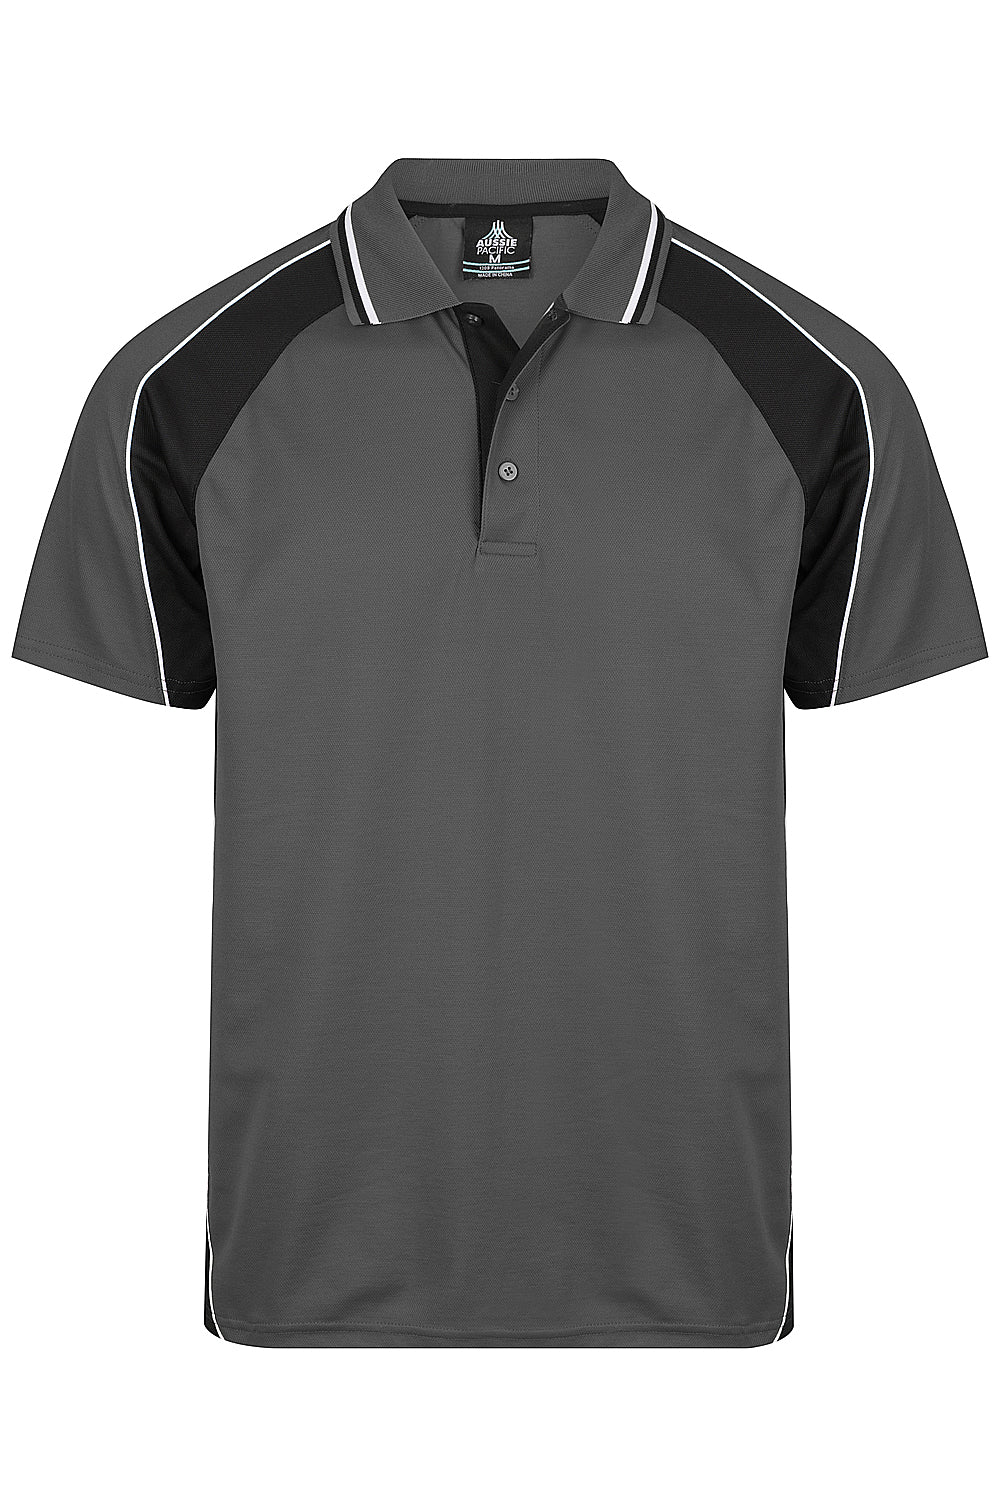 PANORAMA MENS POLOS RUNOUT - 1309-Aussie Pacific-70